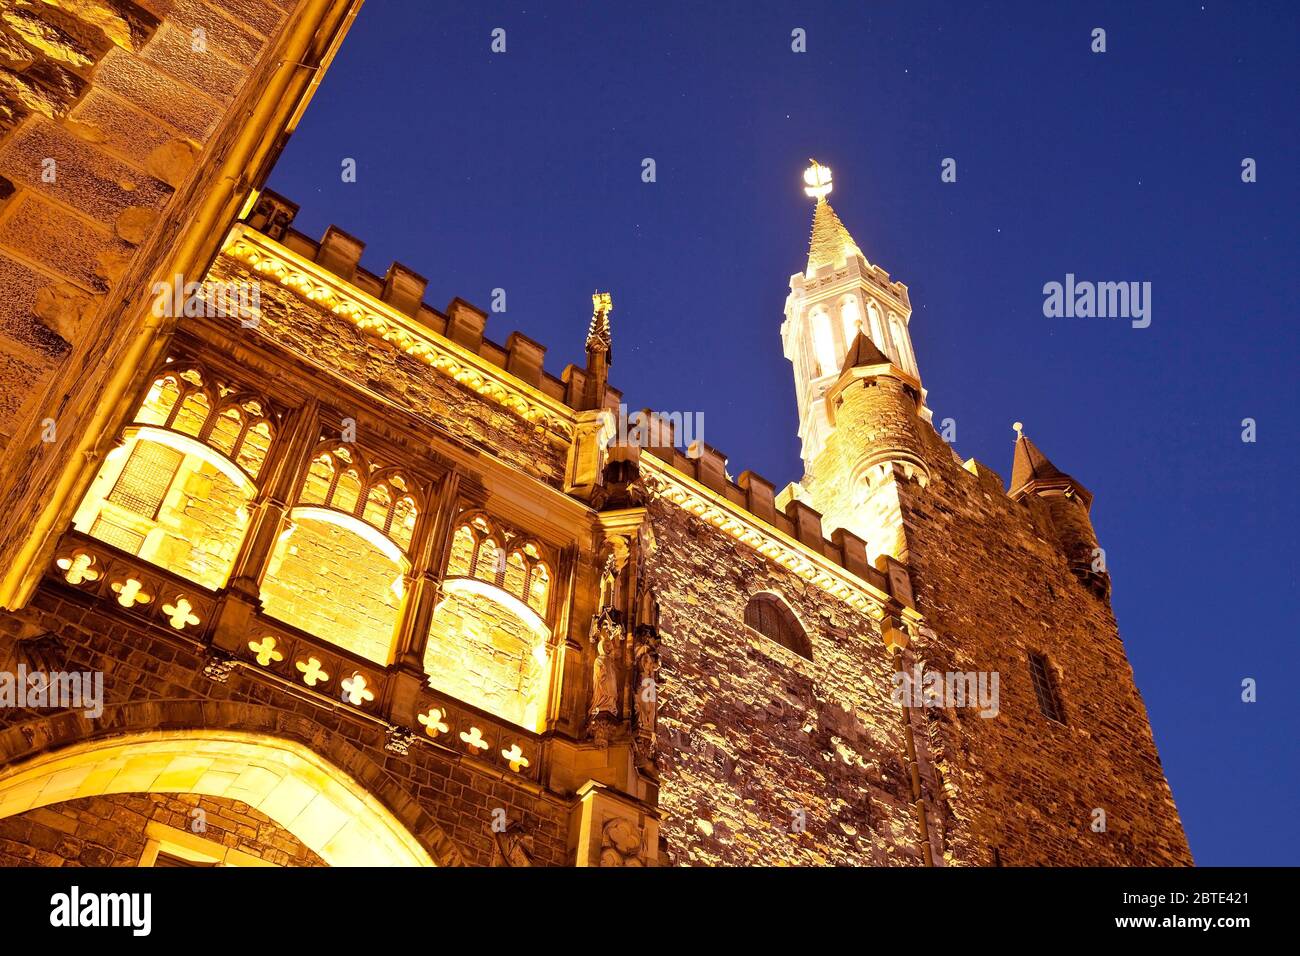 Aachen town hall in the evening, Germany, North Rhine-Westphalia, Aix-la-Chapelle Stock Photo